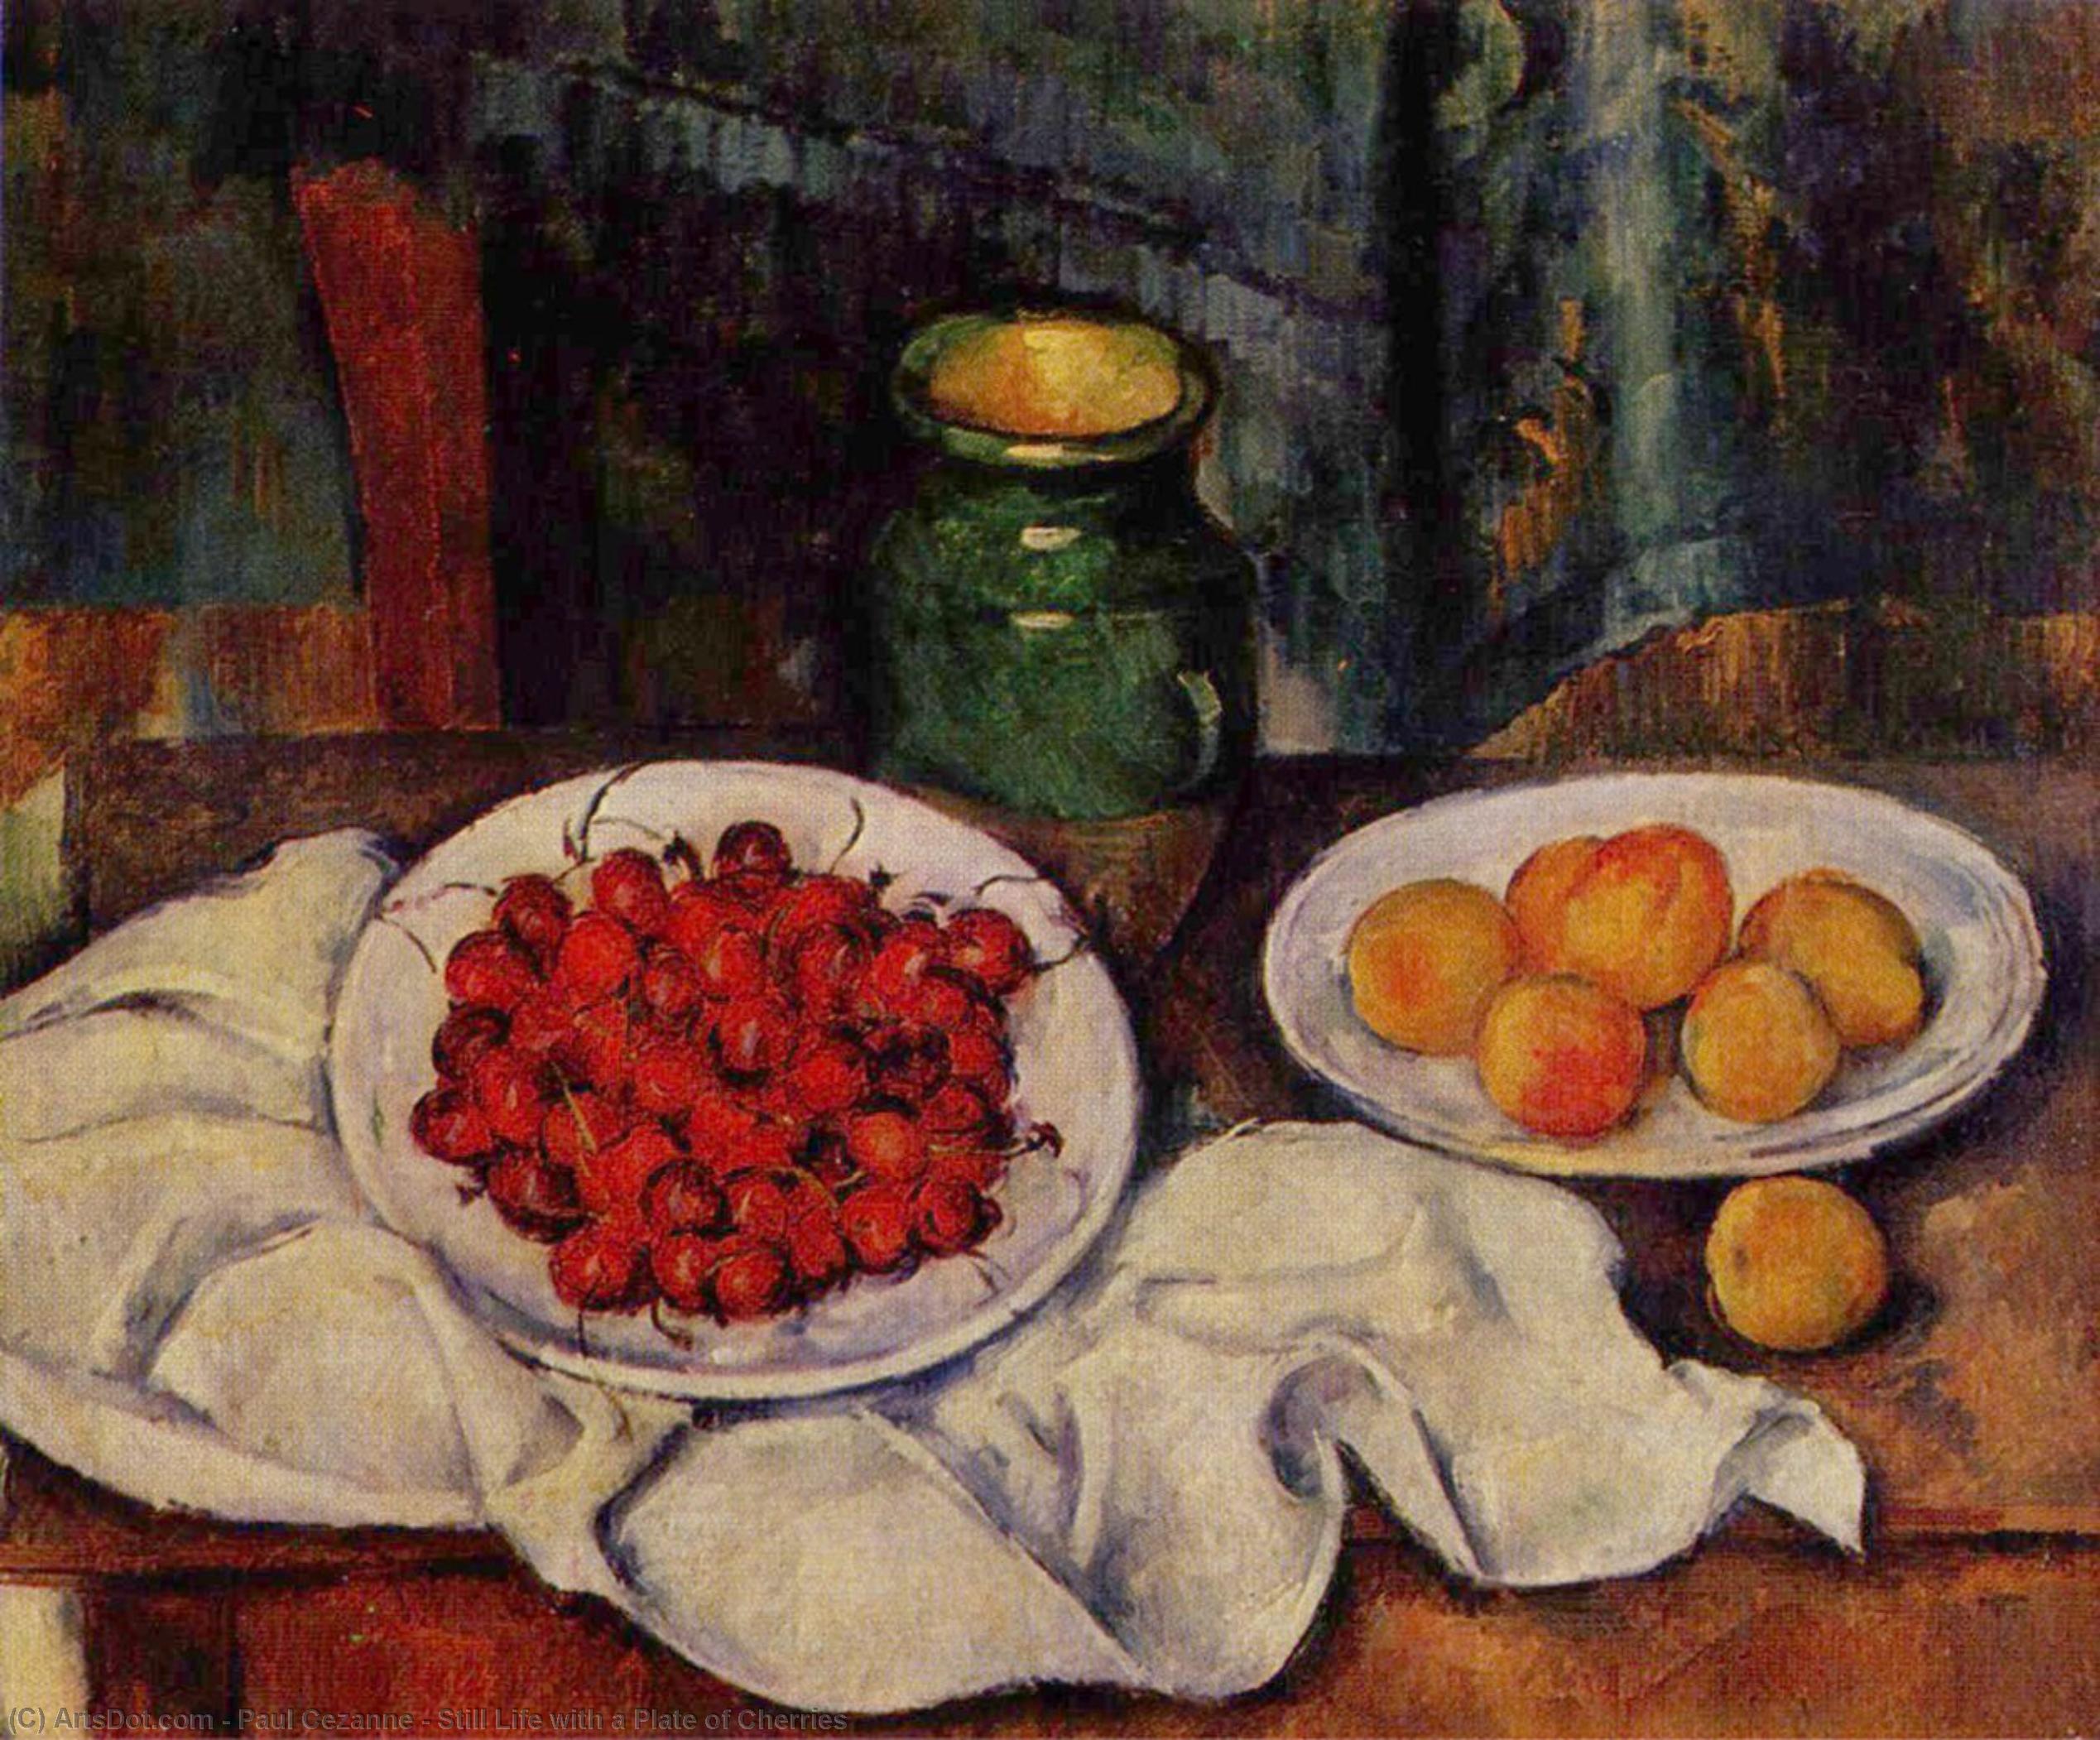 WikiOO.org - Encyclopedia of Fine Arts - Maalaus, taideteos Paul Cezanne - Still Life with a Plate of Cherries